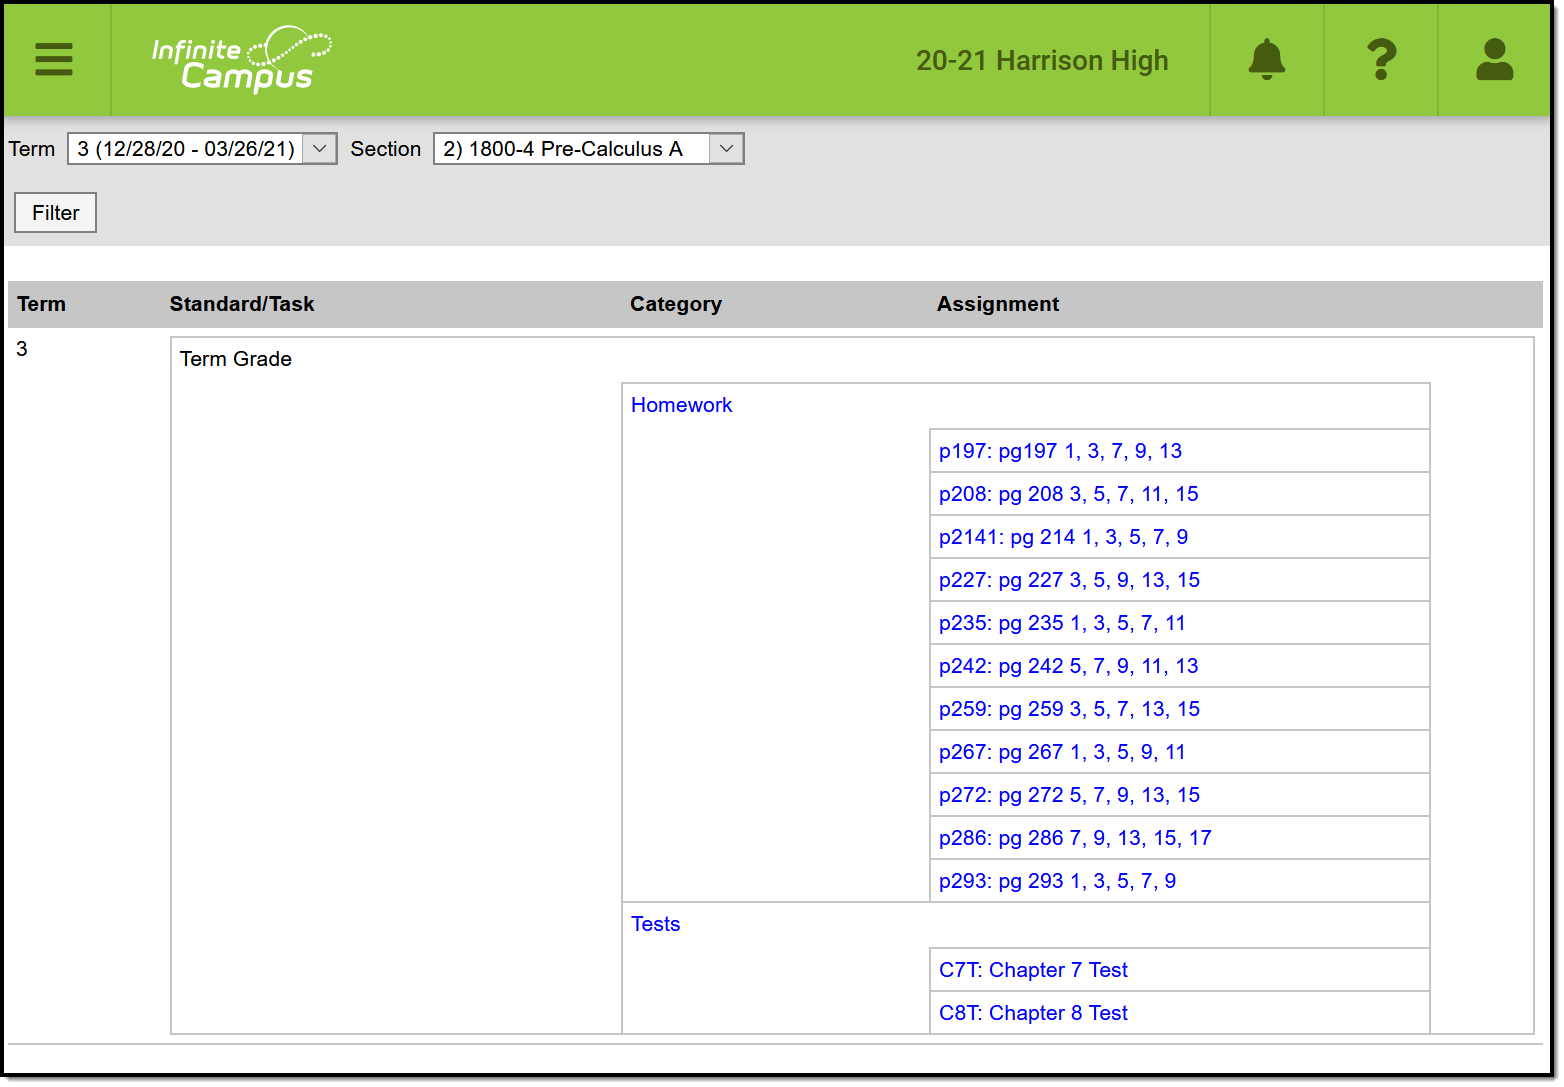 Screenshot of the Assignment Overview with all assignments listed for the selected Section and Term.  